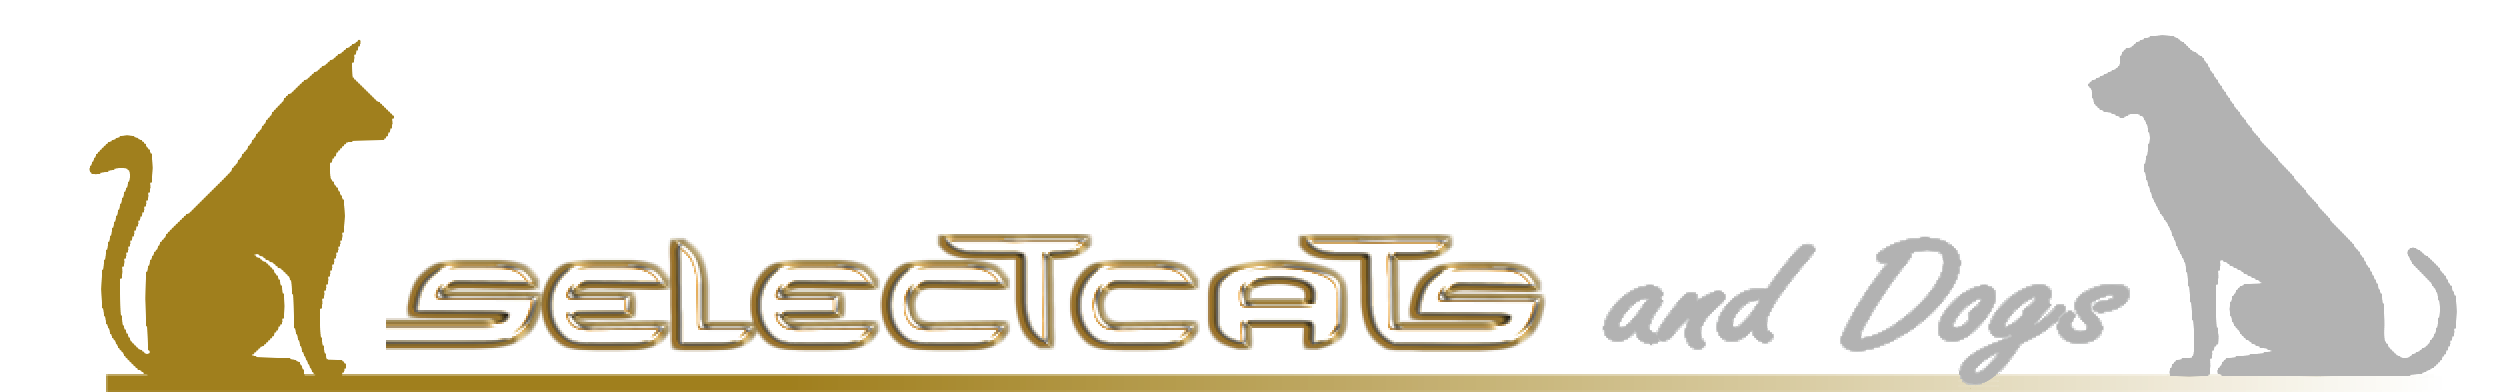 Home Selectcats and Dogs (Logo)